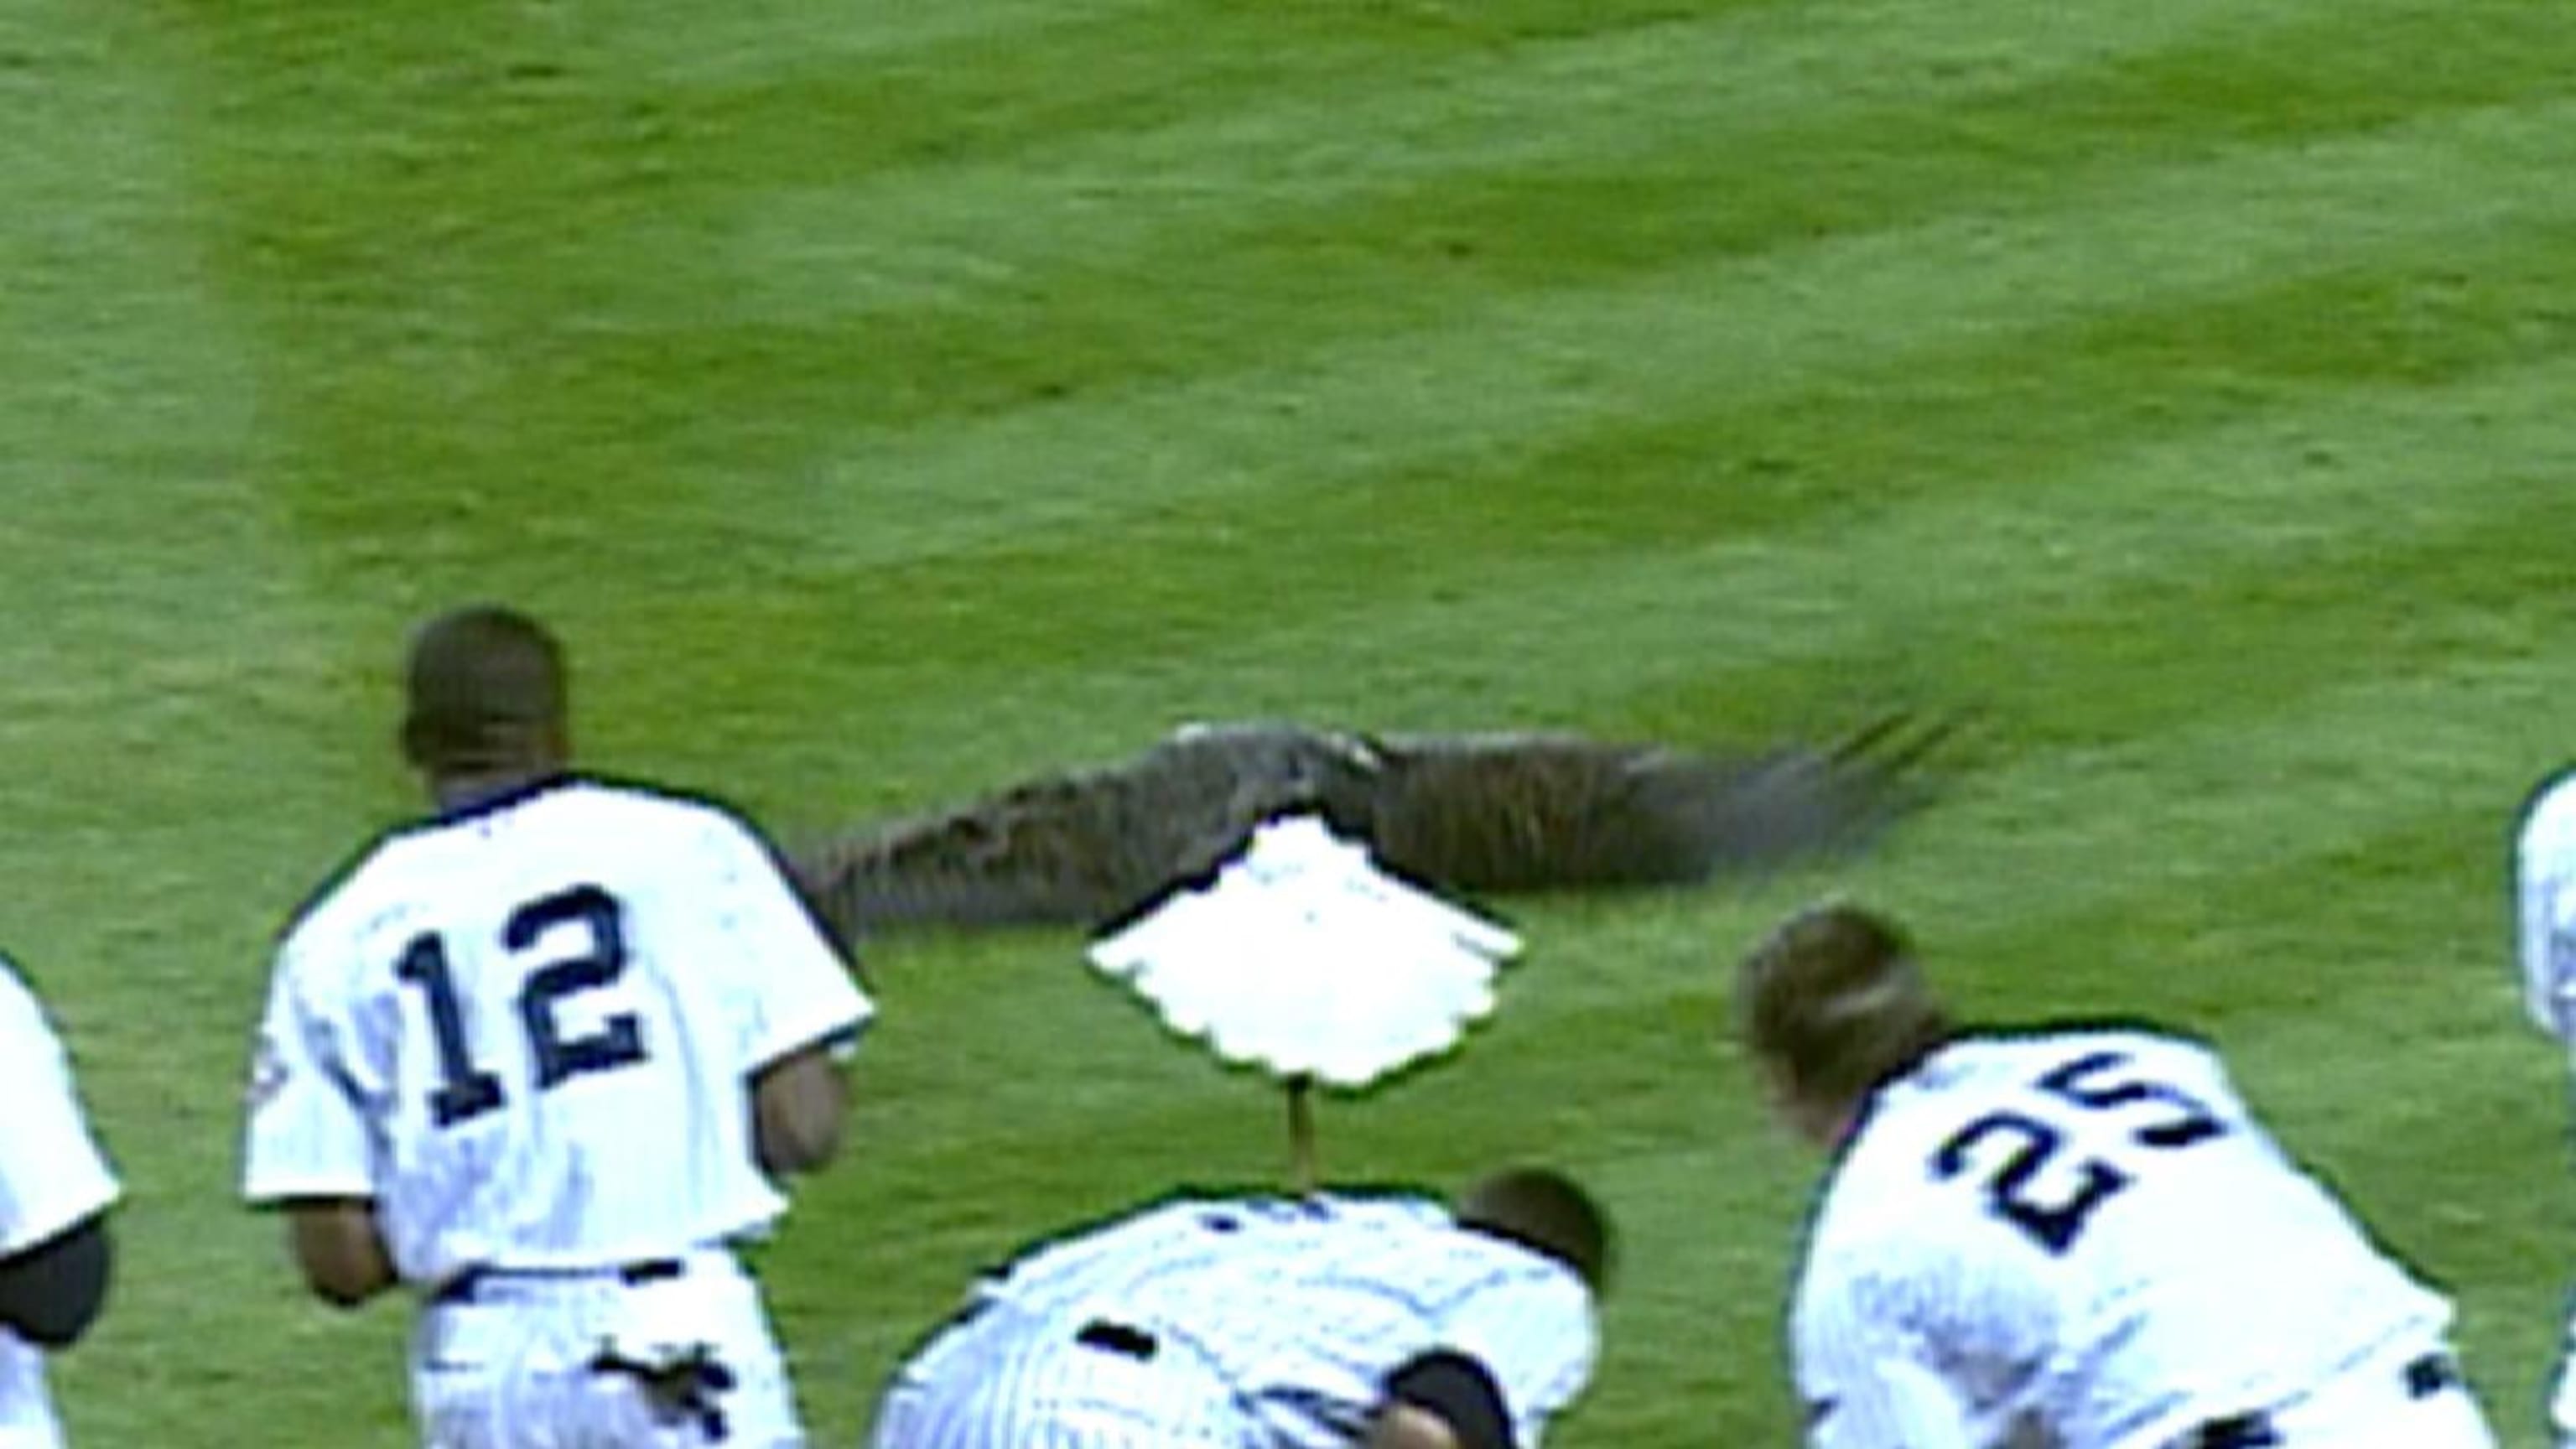 15 years before James Paxton, an eagle almost flew into Derek Jeter's head